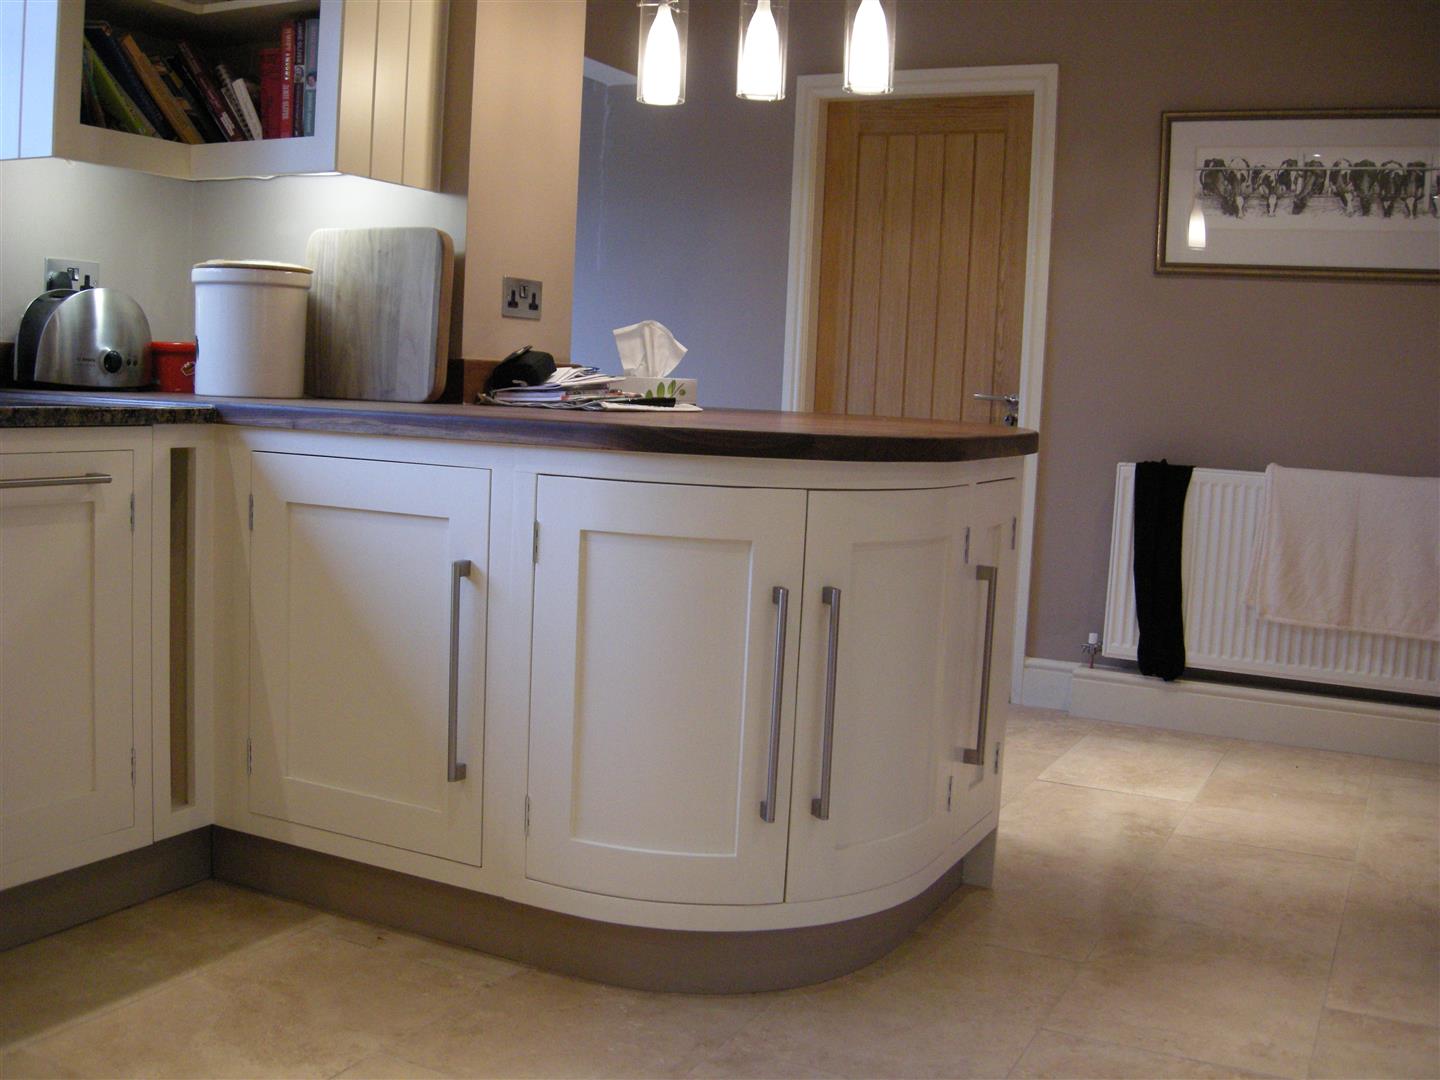 Redbrook kitchens design and install bespoke kitchens in Gloucestershire. More comfortable curves are a real treat